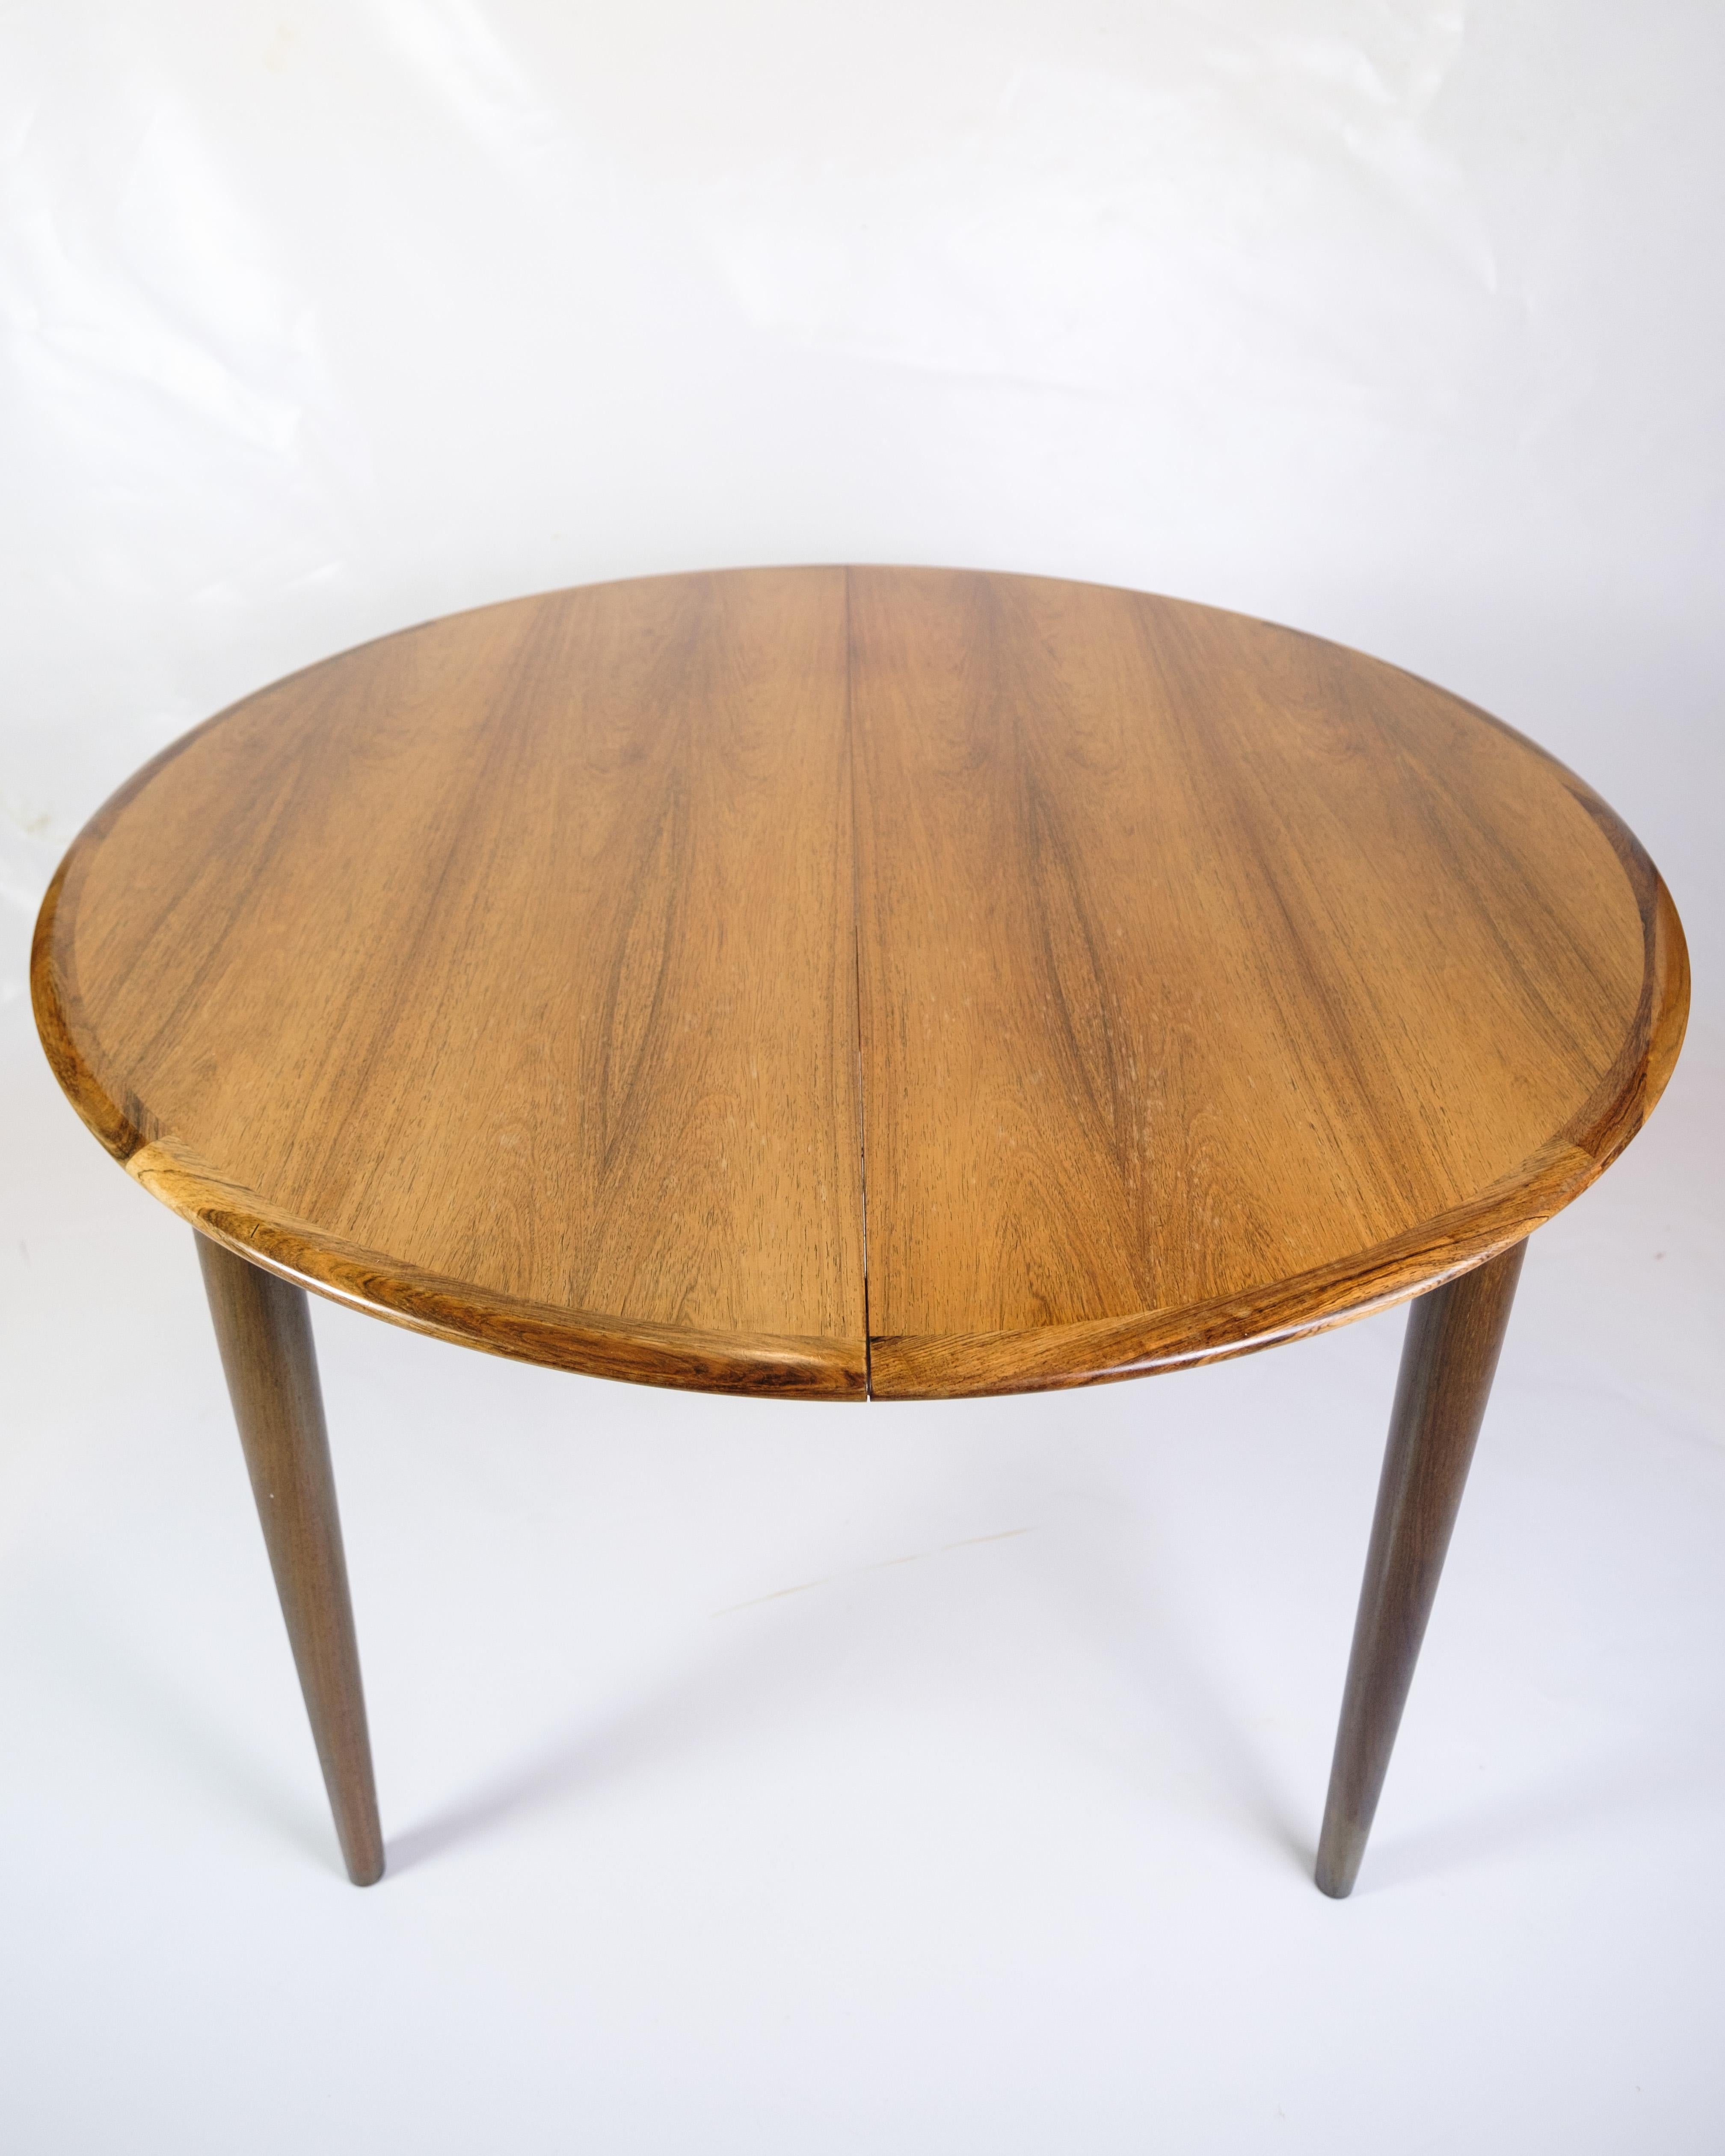 This round dining table in rosewood is a classy example of Danish design from the 1960s. The furniture was created by the renowned furniture designer Arne Vodder, who is known for his simple and functional approach to design.

The table is made of